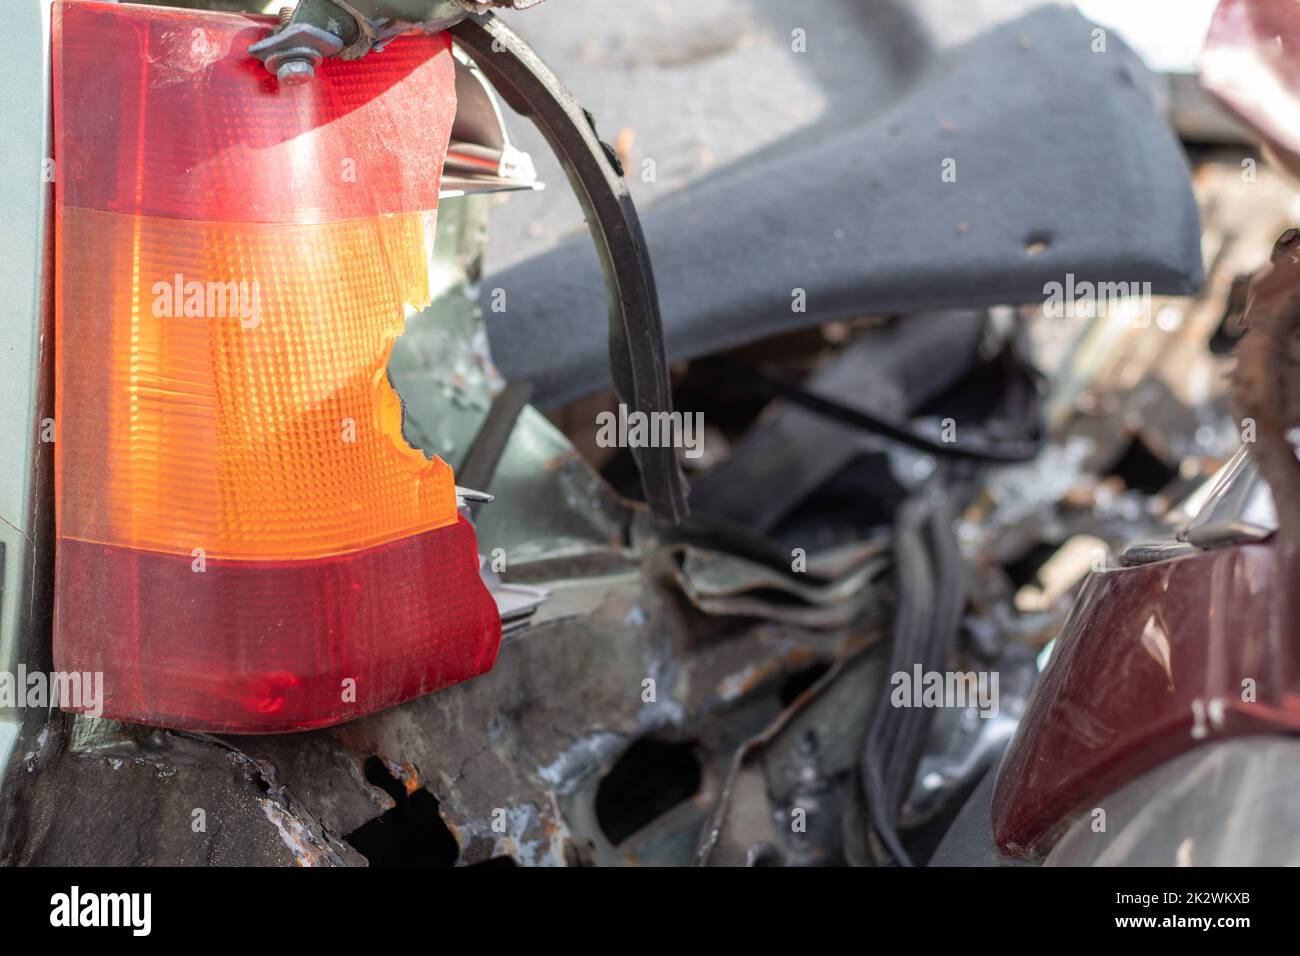 A red and orange broken glass lamp on a car as a result of a violent collision. Broken rear headlight close-up due to a car accident or careless driving. Insured event, safe driving concept. Stock Photo